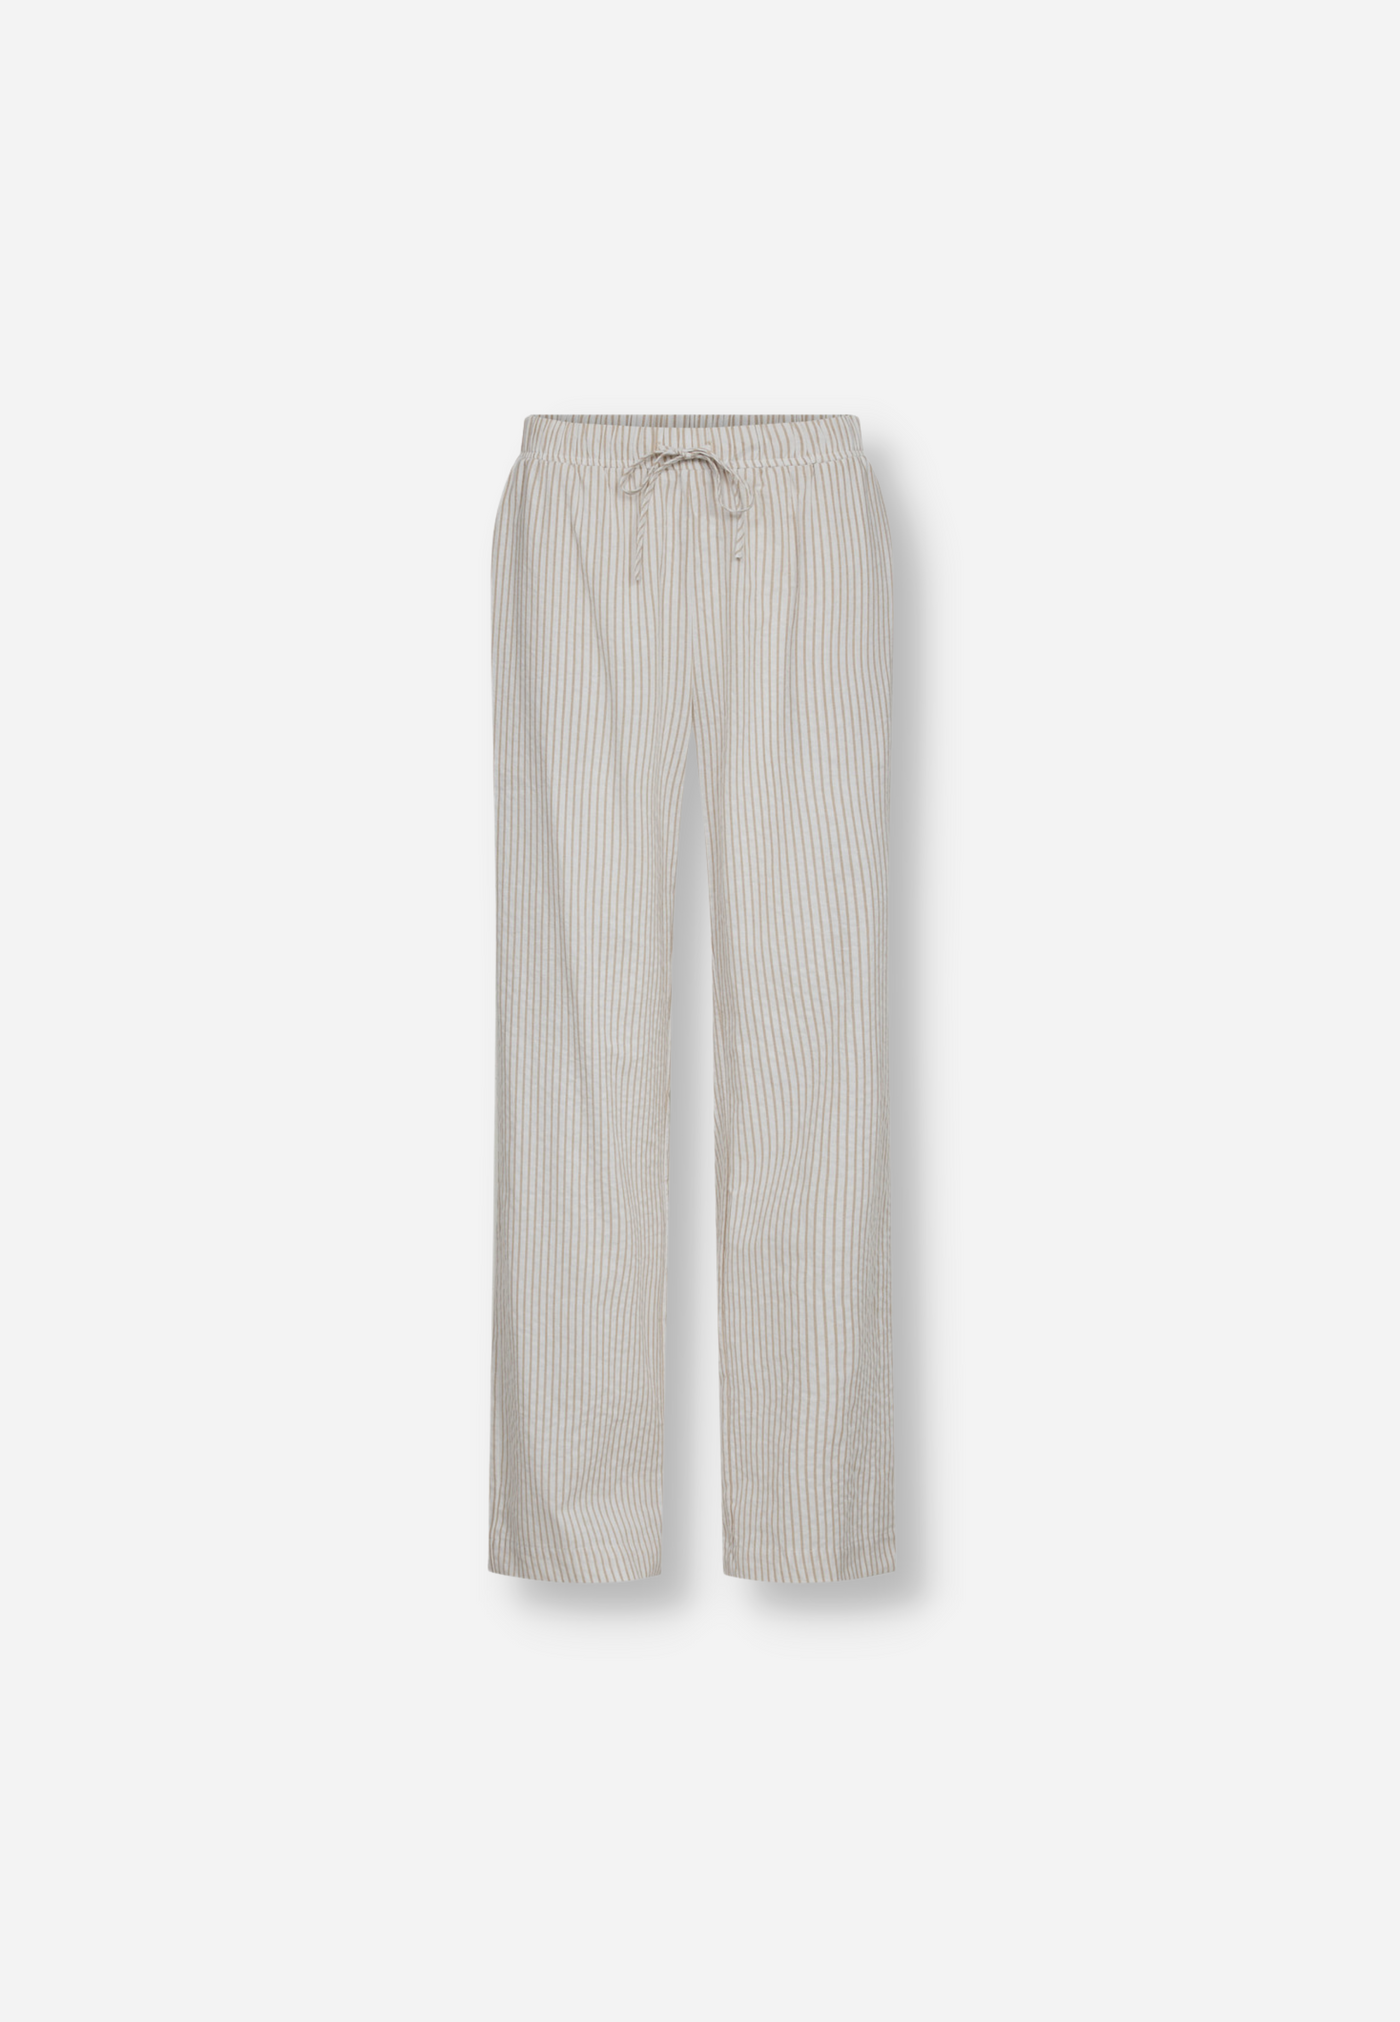 TROUSERS - LIGHT BROWN STRIPED